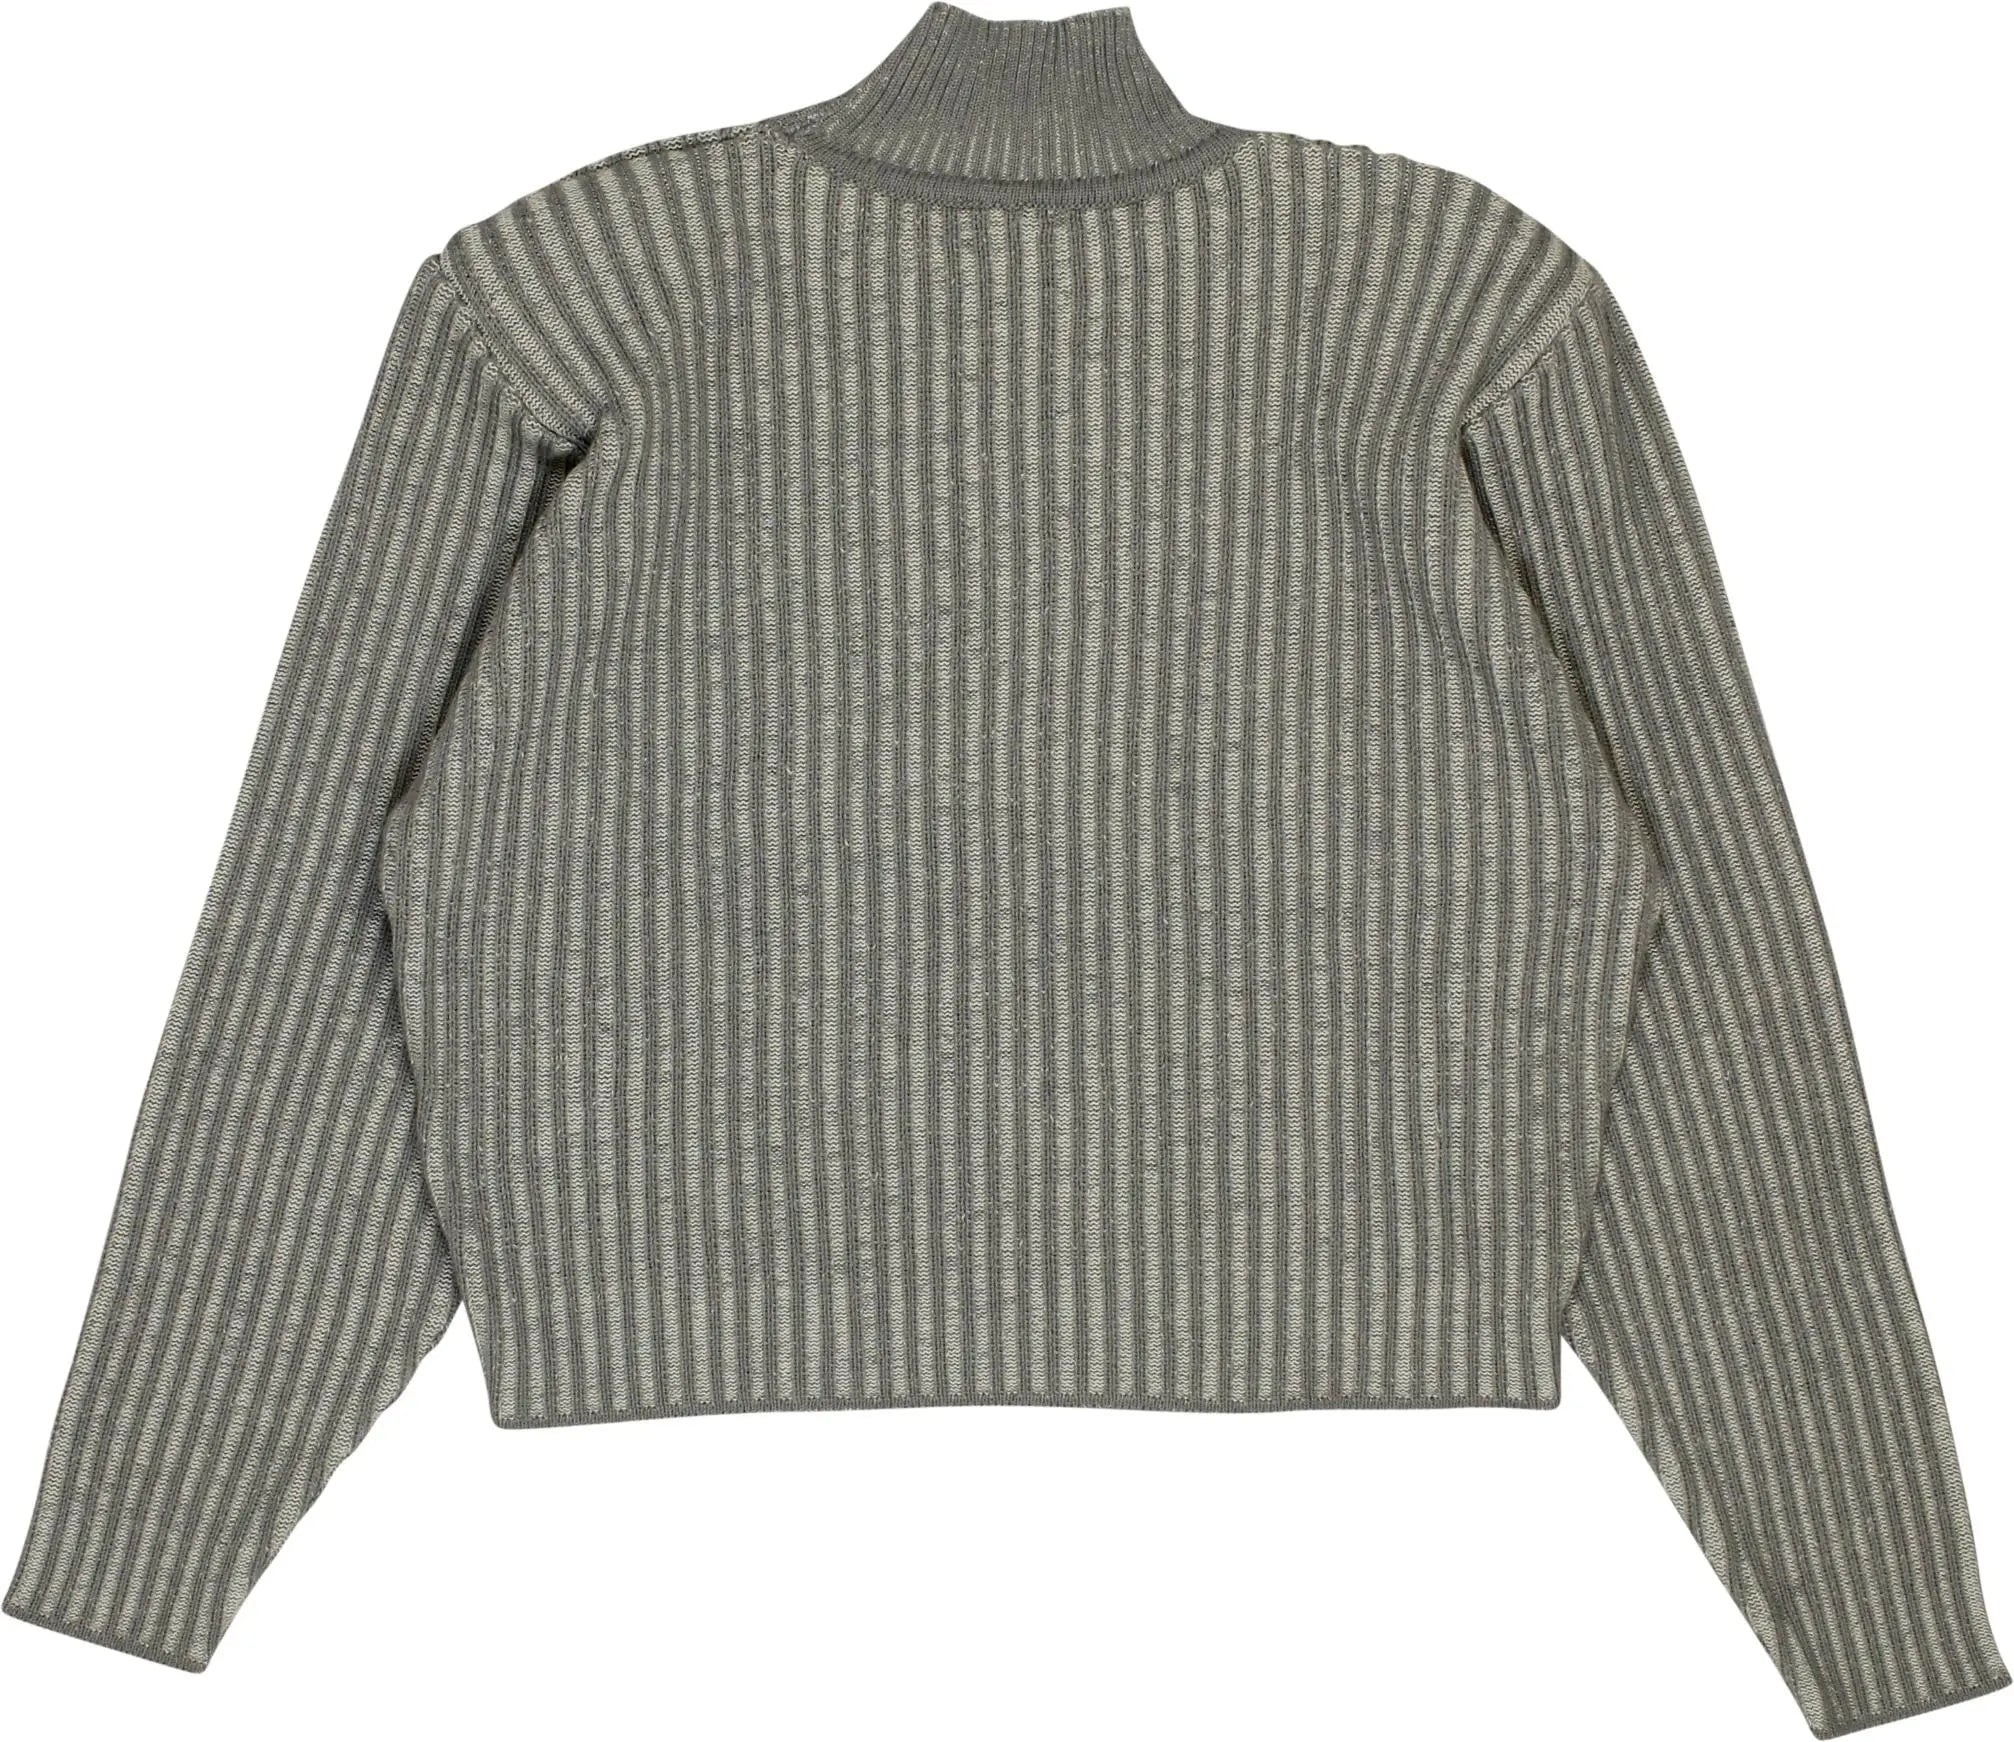 Unknown - 80s Turtleneck Jumper with Shoulder Pads- ThriftTale.com - Vintage and second handclothing